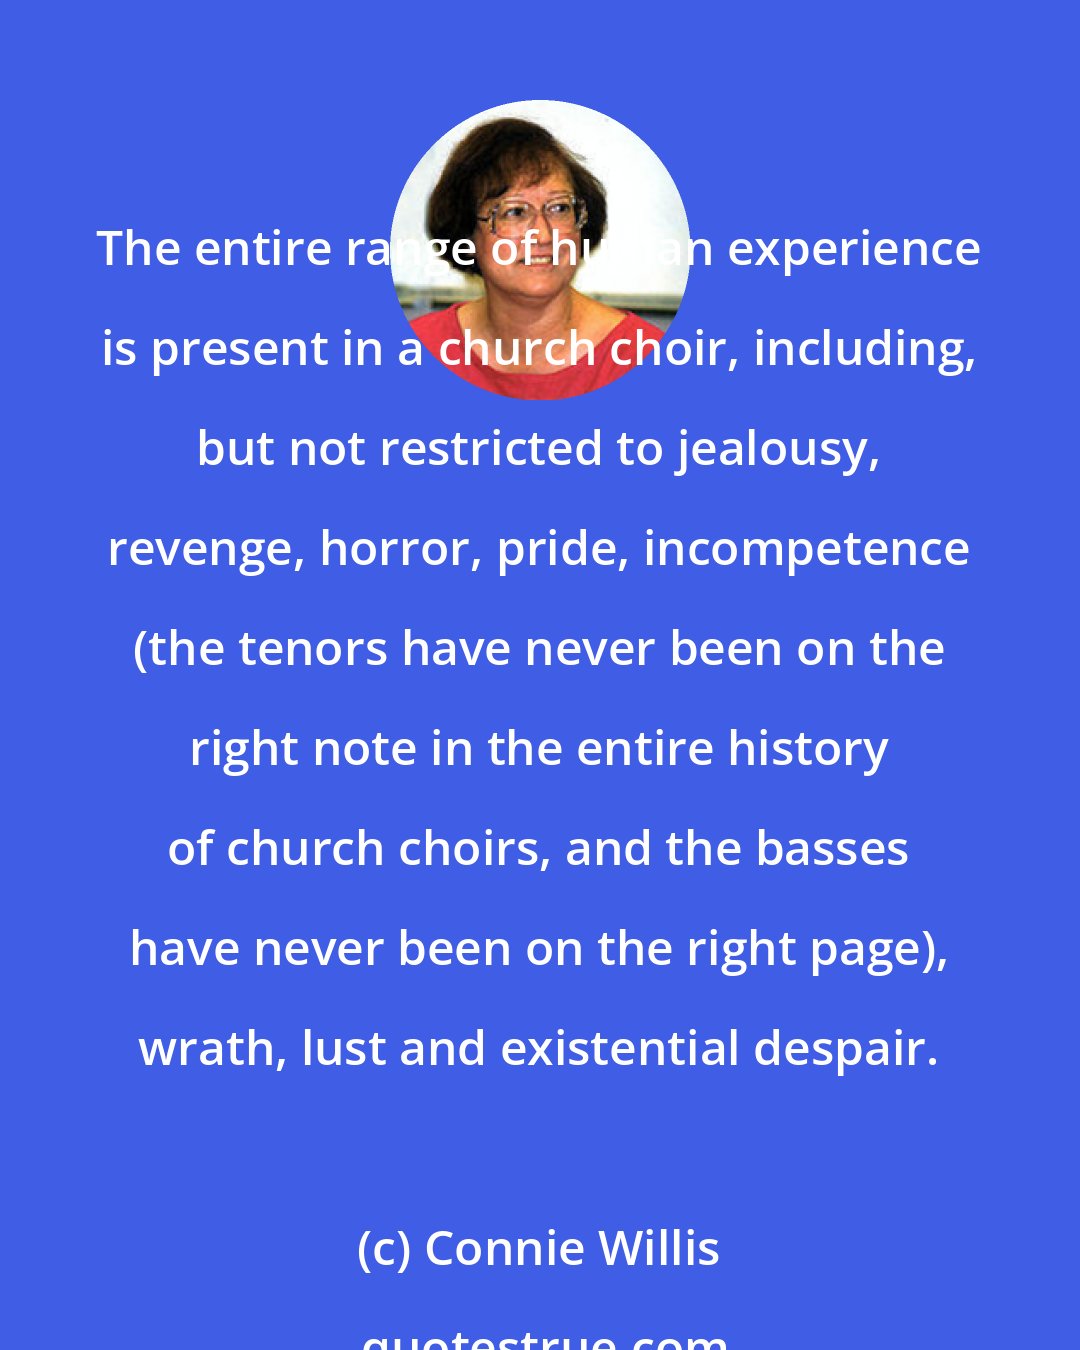 Connie Willis: The entire range of human experience is present in a church choir, including, but not restricted to jealousy, revenge, horror, pride, incompetence (the tenors have never been on the right note in the entire history of church choirs, and the basses have never been on the right page), wrath, lust and existential despair.